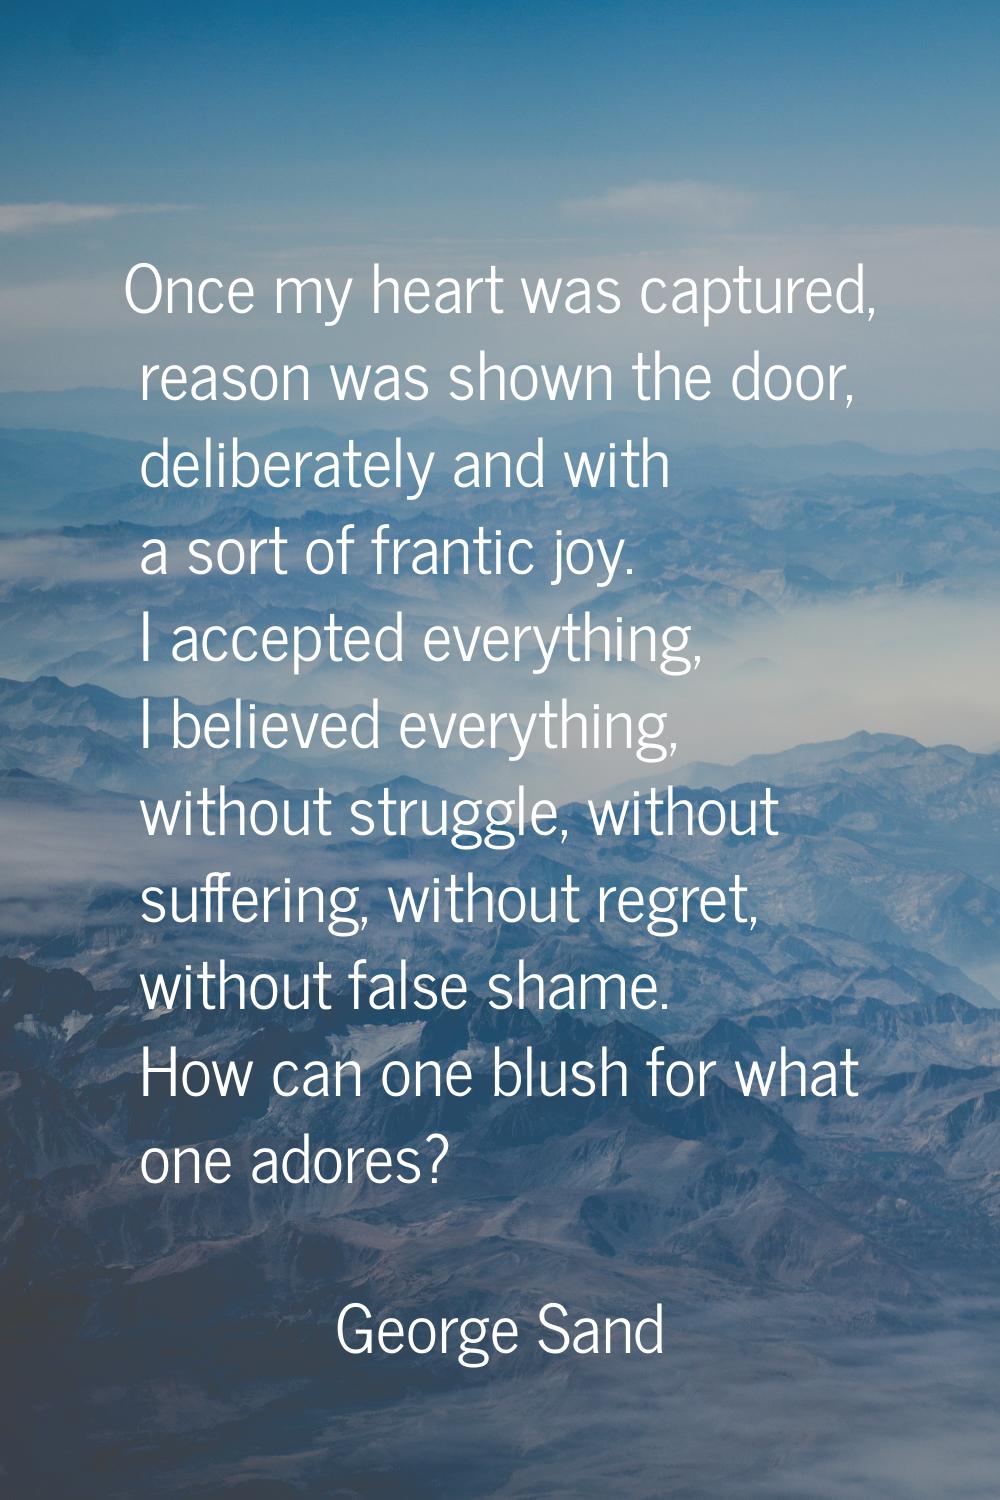 Once my heart was captured, reason was shown the door, deliberately and with a sort of frantic joy.